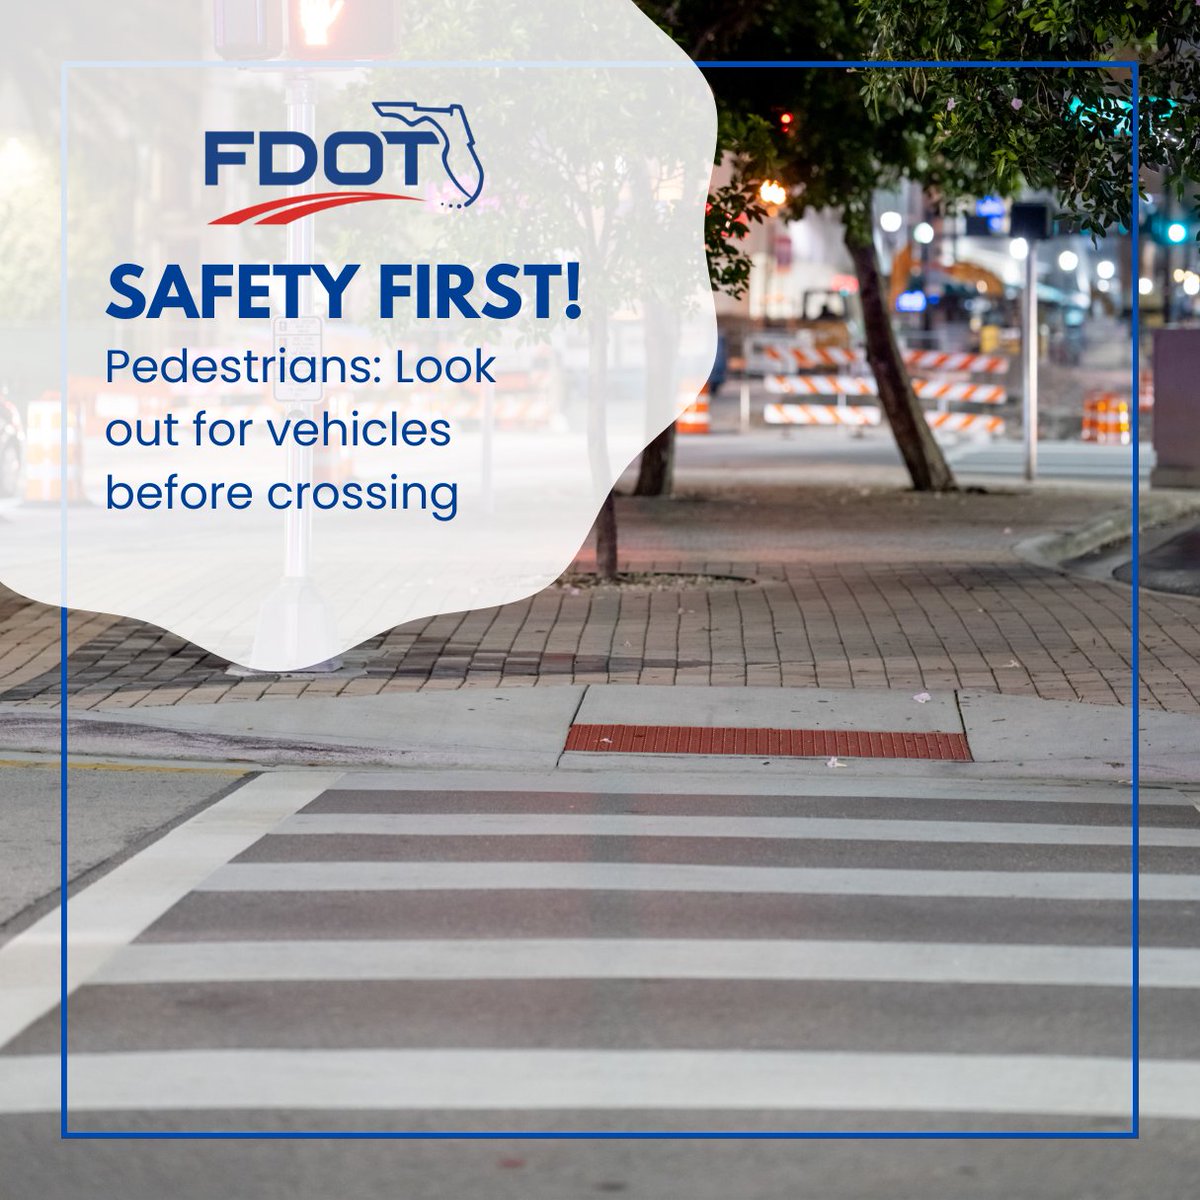 🚶‍♂️ Keep safe while walking & follow these pedestrian safety tips when crossing streets or intersections: •Look for approaching vehicles in all directions •If there are no crosswalks, find a well-lit area with a clear view of traffic •Wait for a safe gap to cross